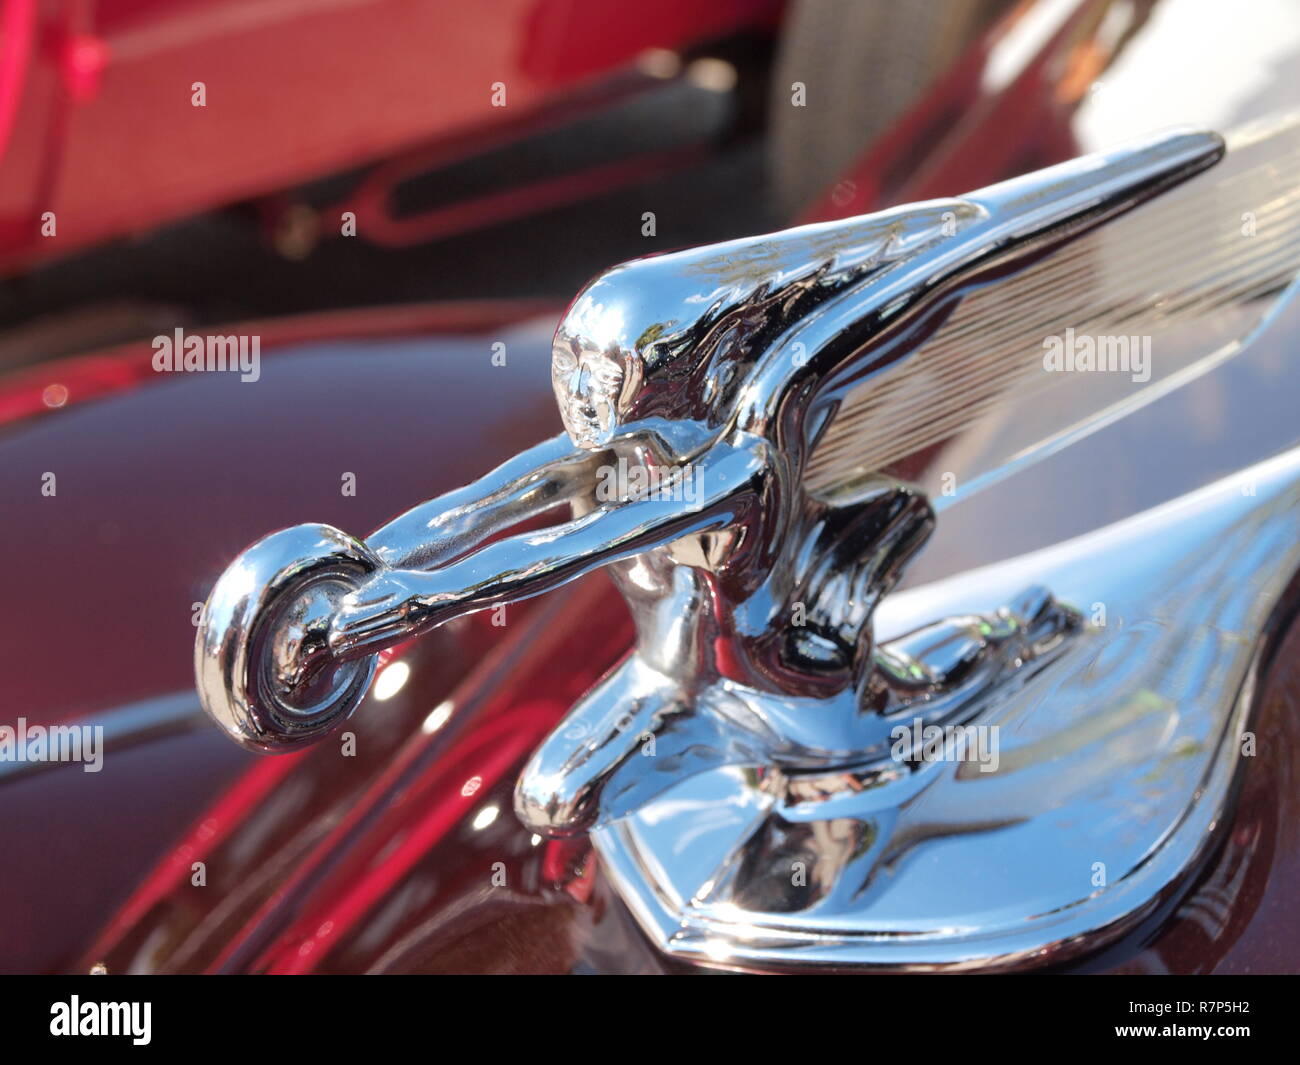 Beautiful 1940 Packard hood ornament in bright chrome. Virtually every automobile manufacturer had its' own identifying hood ornament. Stock Photo